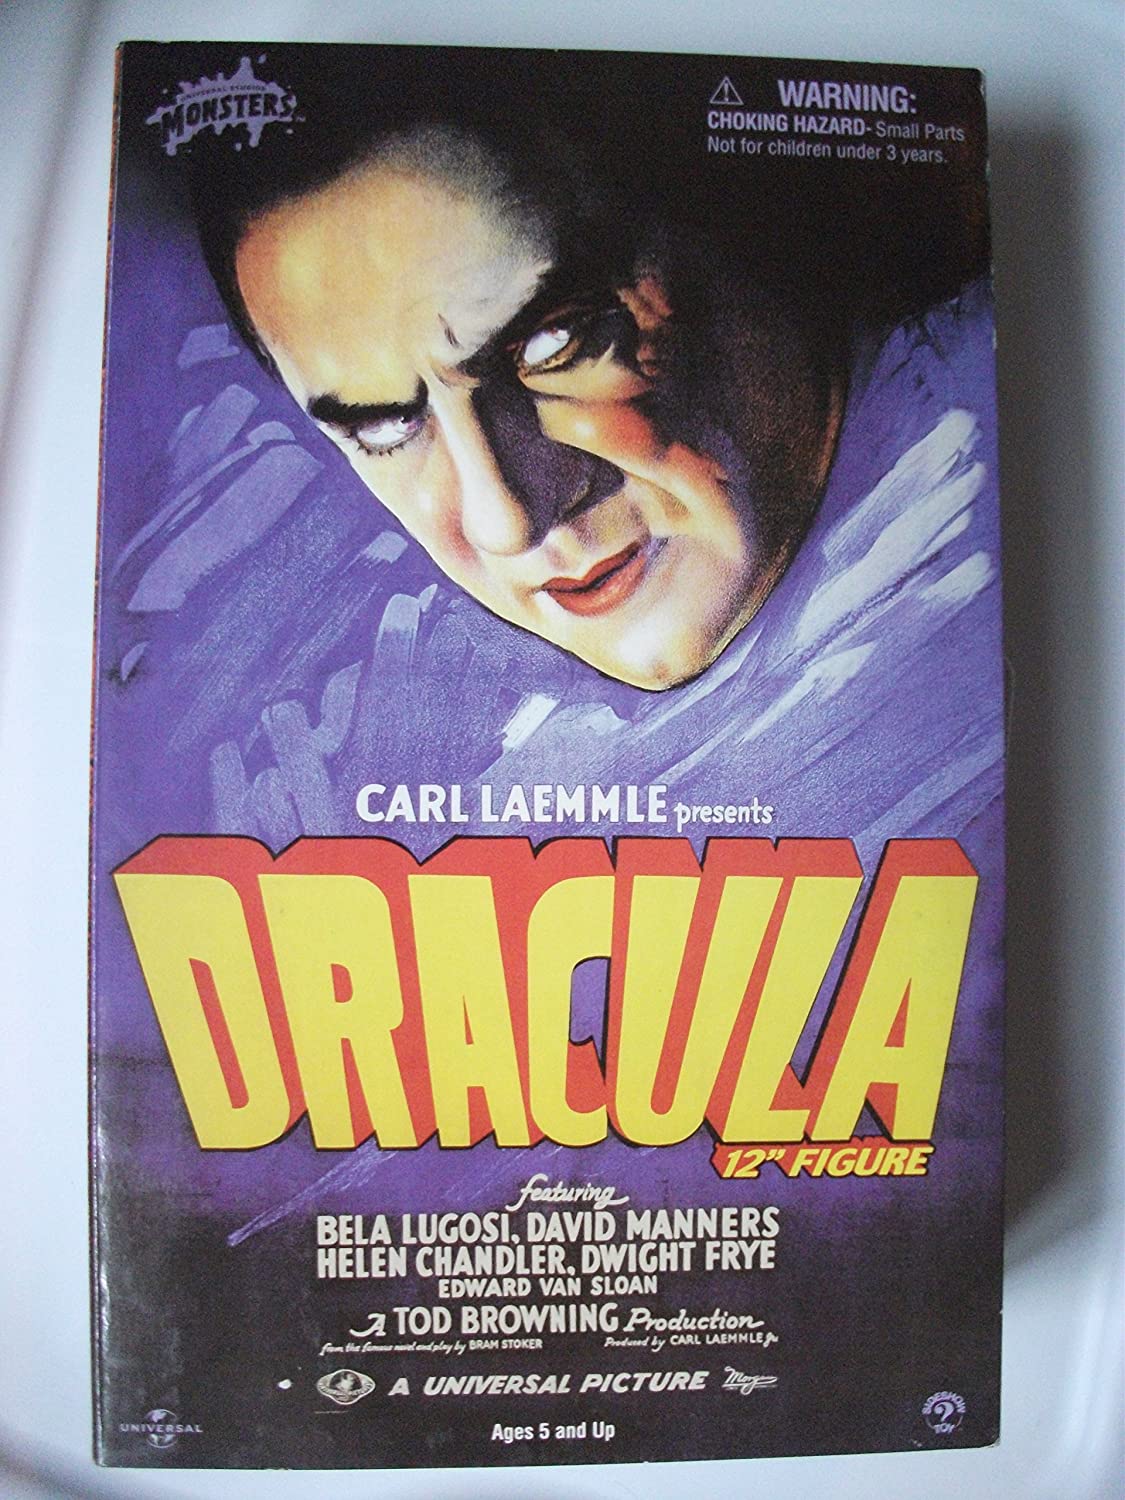 Monsters Bela Lugosi as Dracula Sideshow Collectibles 12 Inch Figure